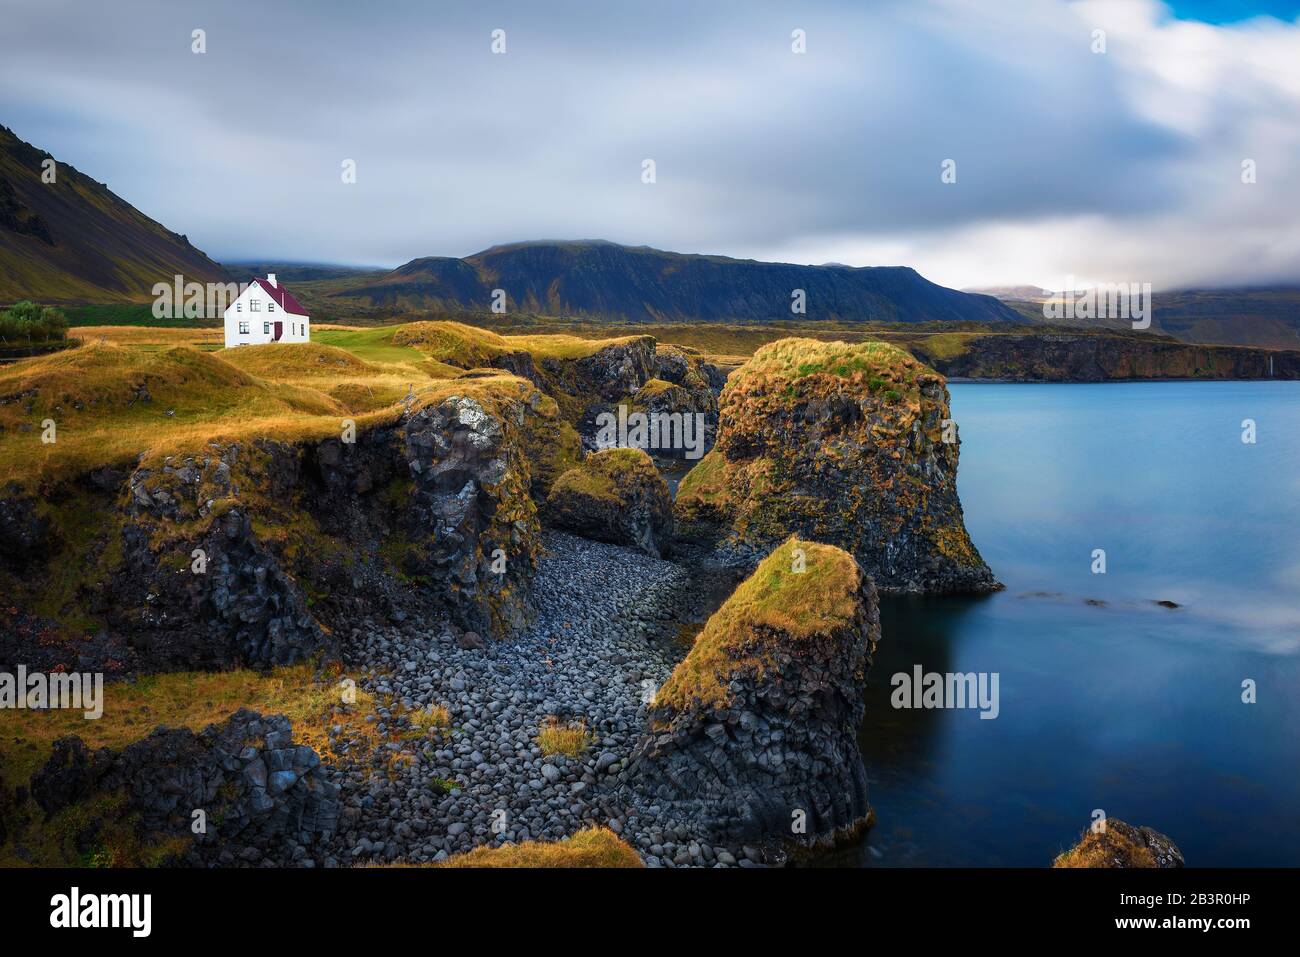 Sea shore in Iceland with cliffs and a small house in the village of Arnarstapi Stock Photo